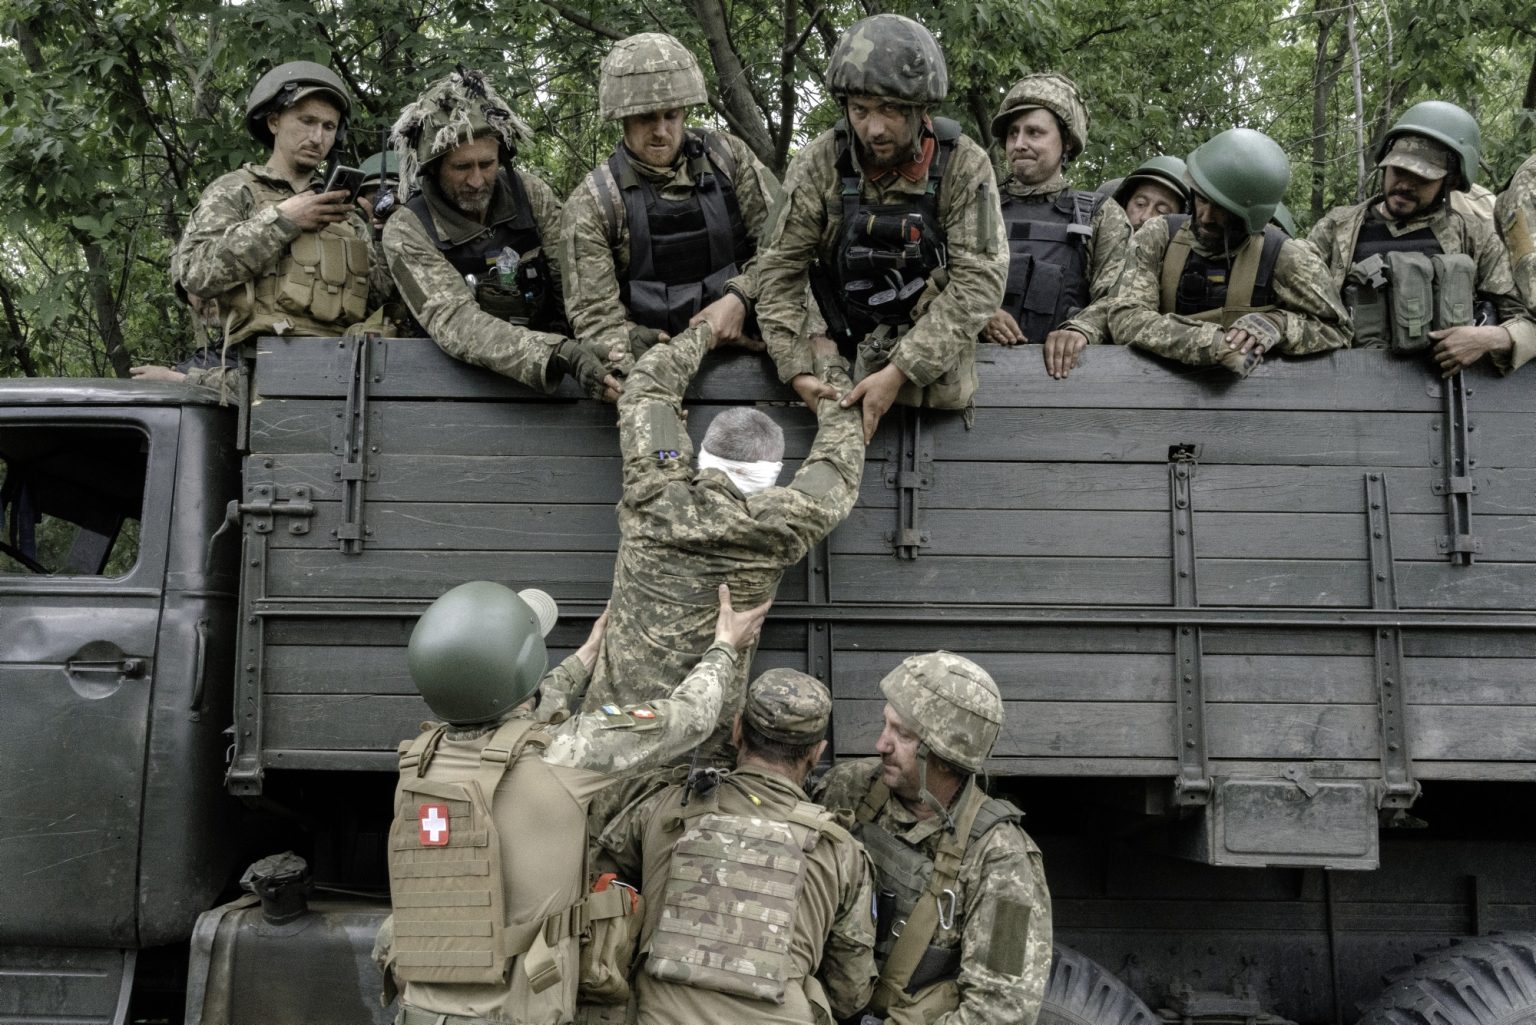 UKRAINE, Donetsk Oblast. June 22, 2022 - An injured soldier is helped to getting of from a troop carrier full of soldiers on the way back from the frontline at Severodonetsk.